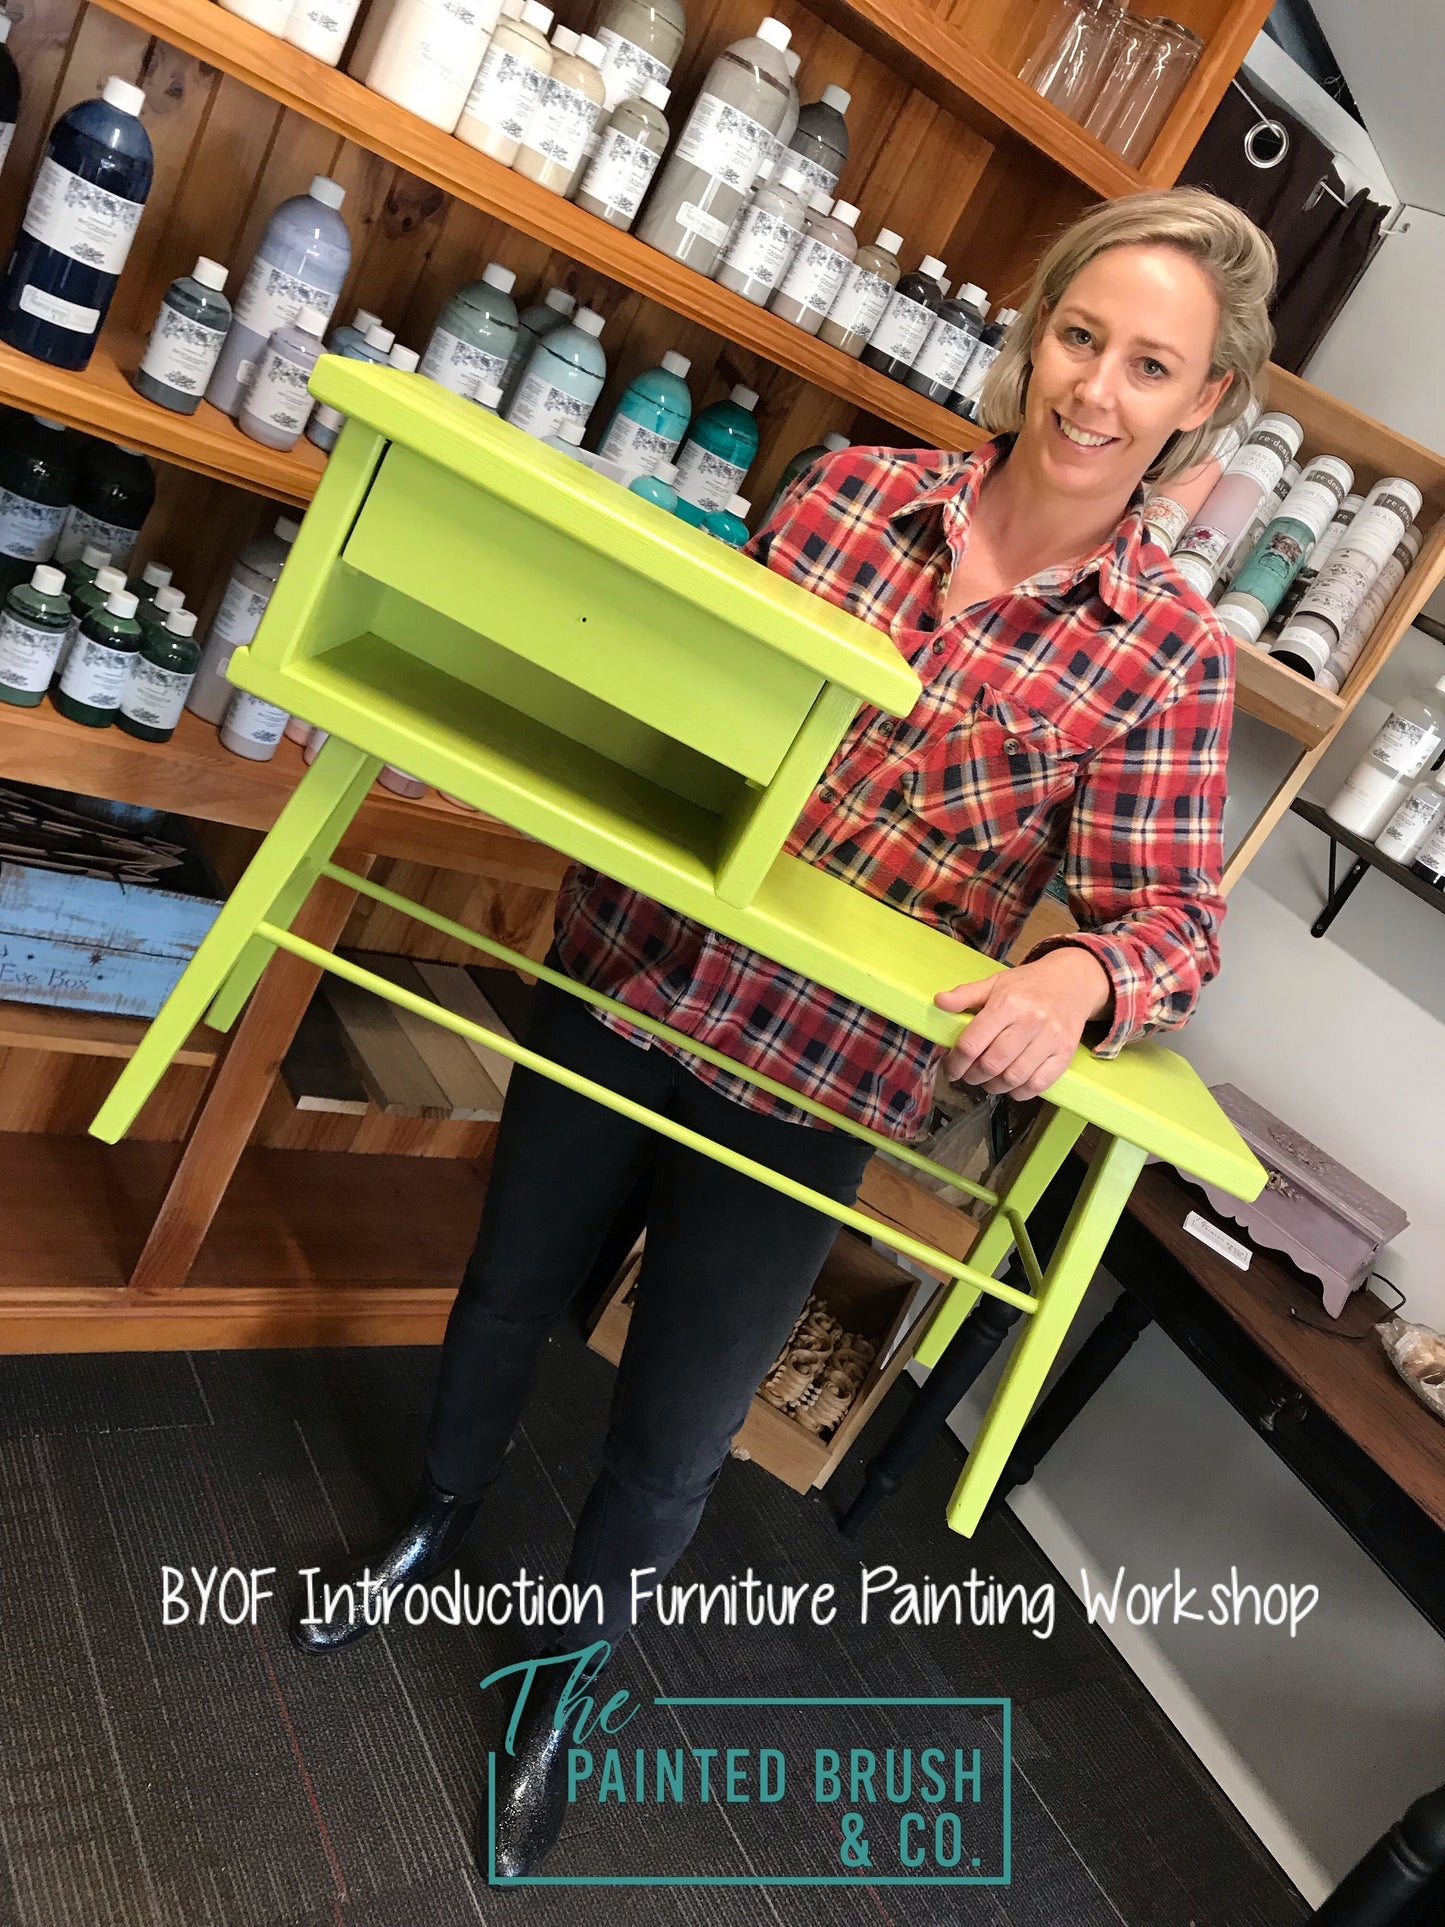 BYOF Introduction to Furniture Painting Workshop | February 10th 10am-2pm